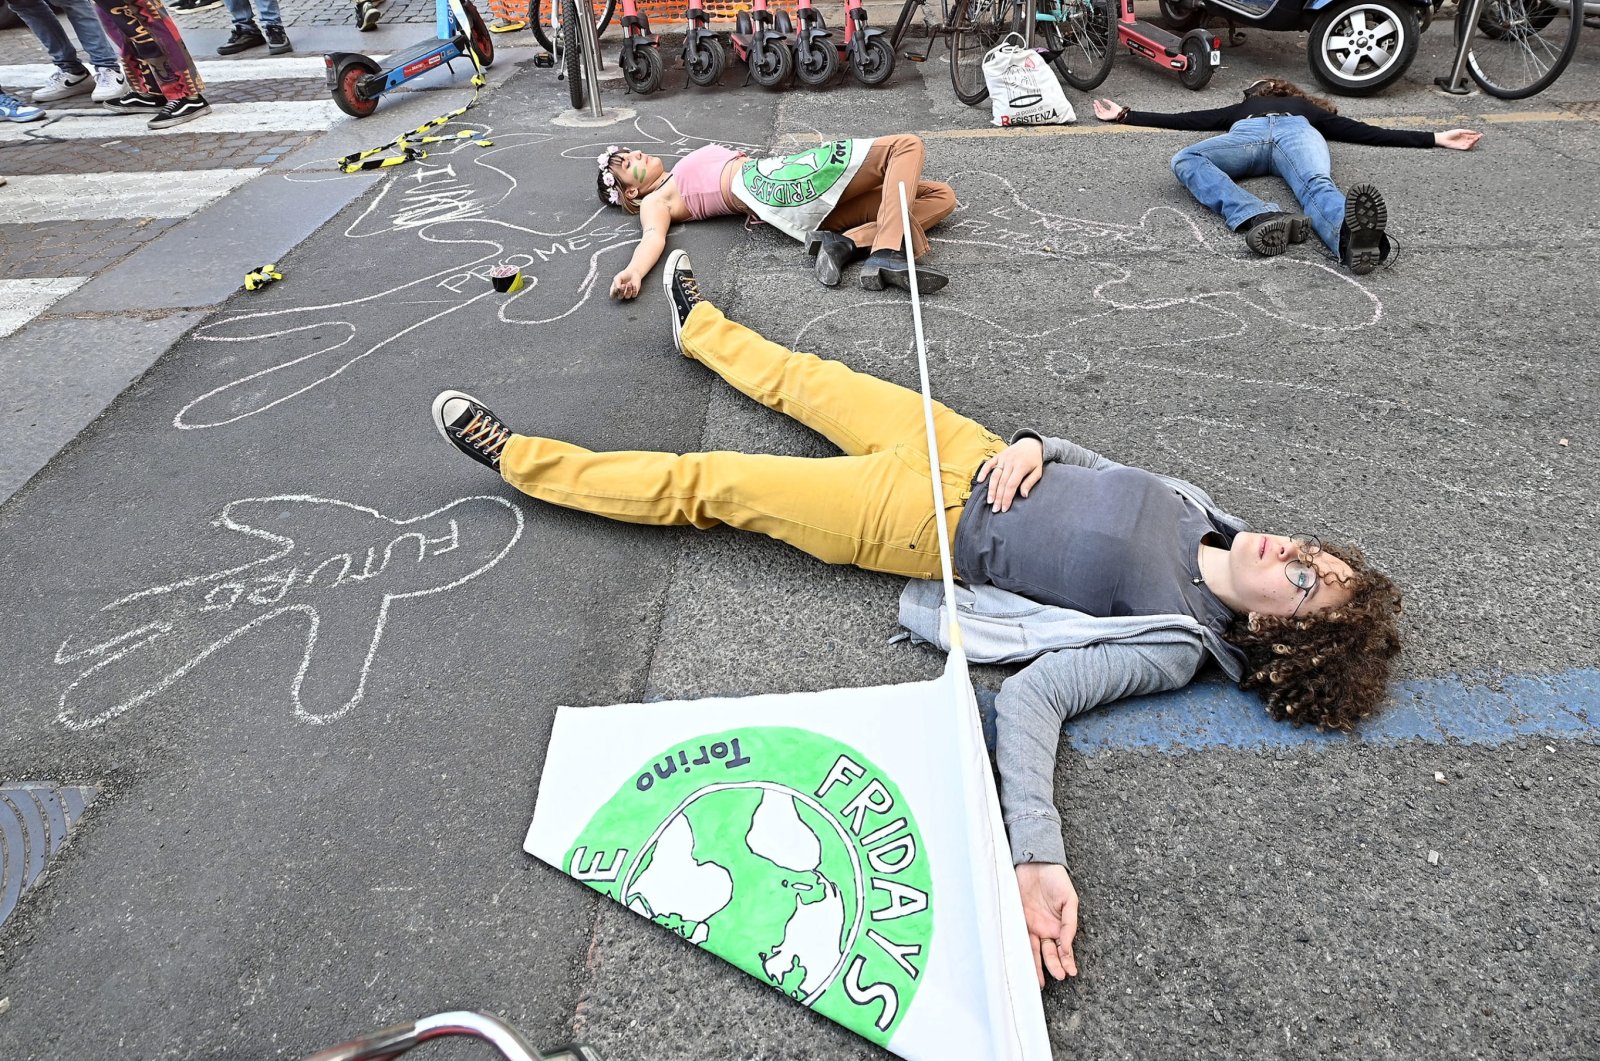 Activists take part in a climate change &quot;Friday for Future&quot; protest in Turin, Italy, March 25, 2022. (EPA Photo)